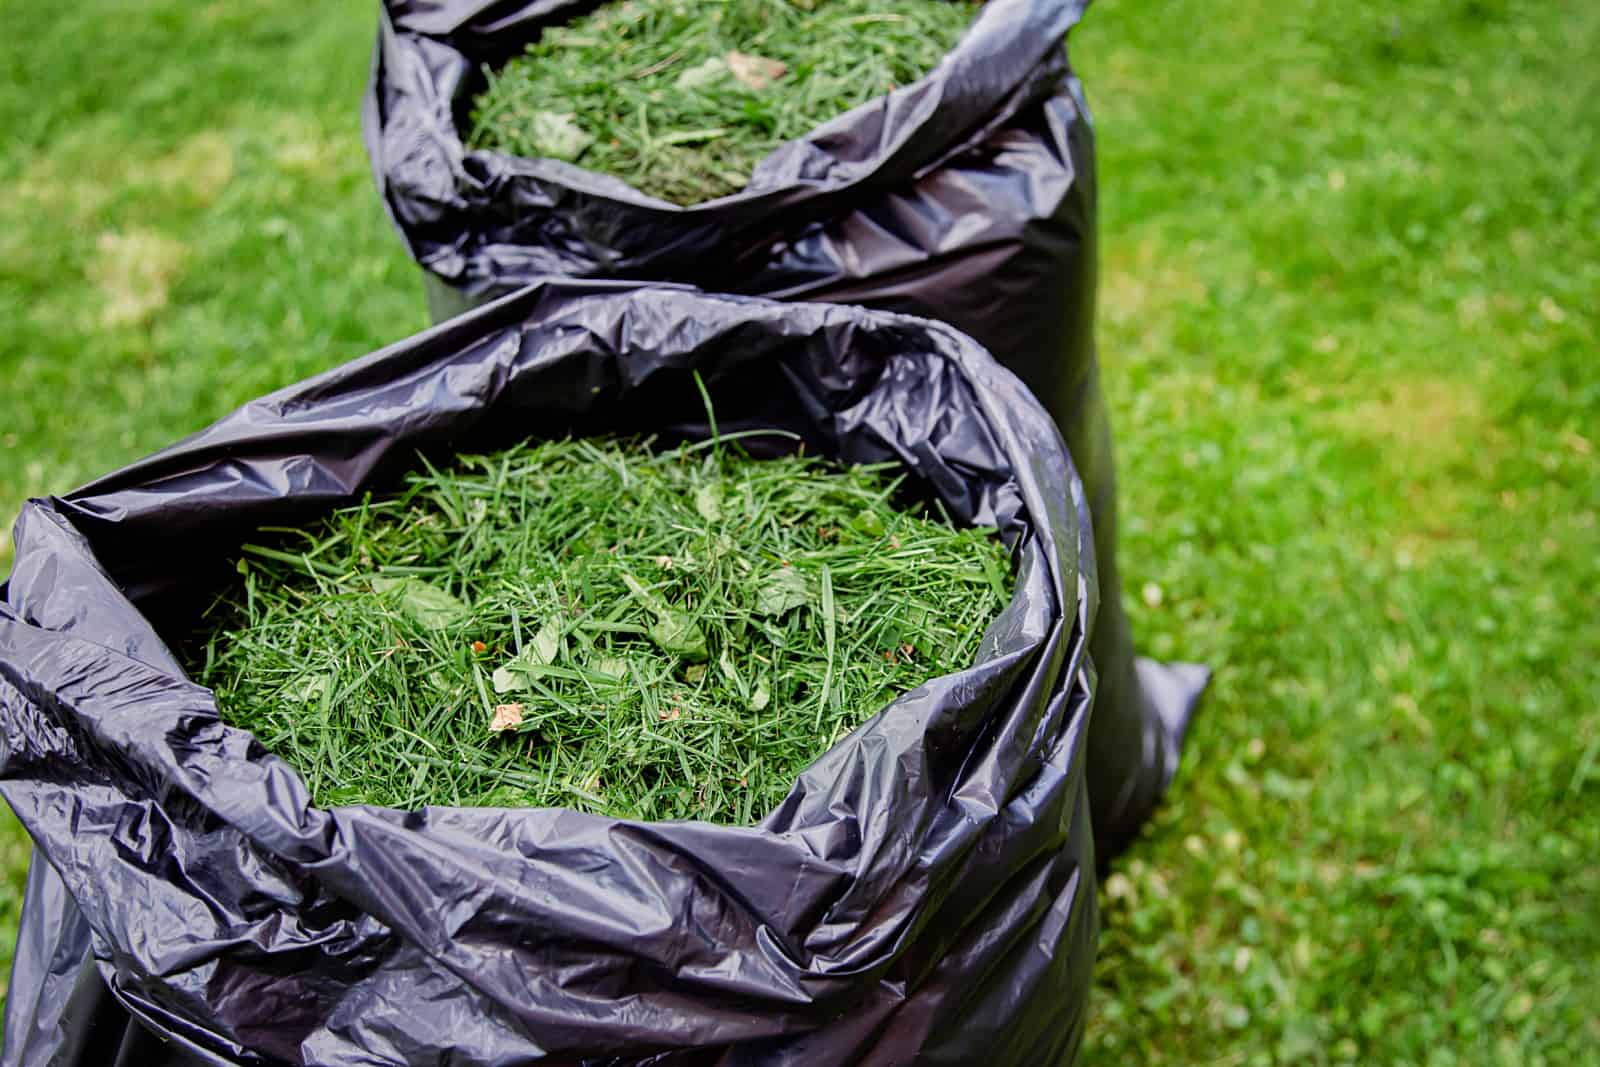 Mowing a household garden lawn with black bag of grass clippings.